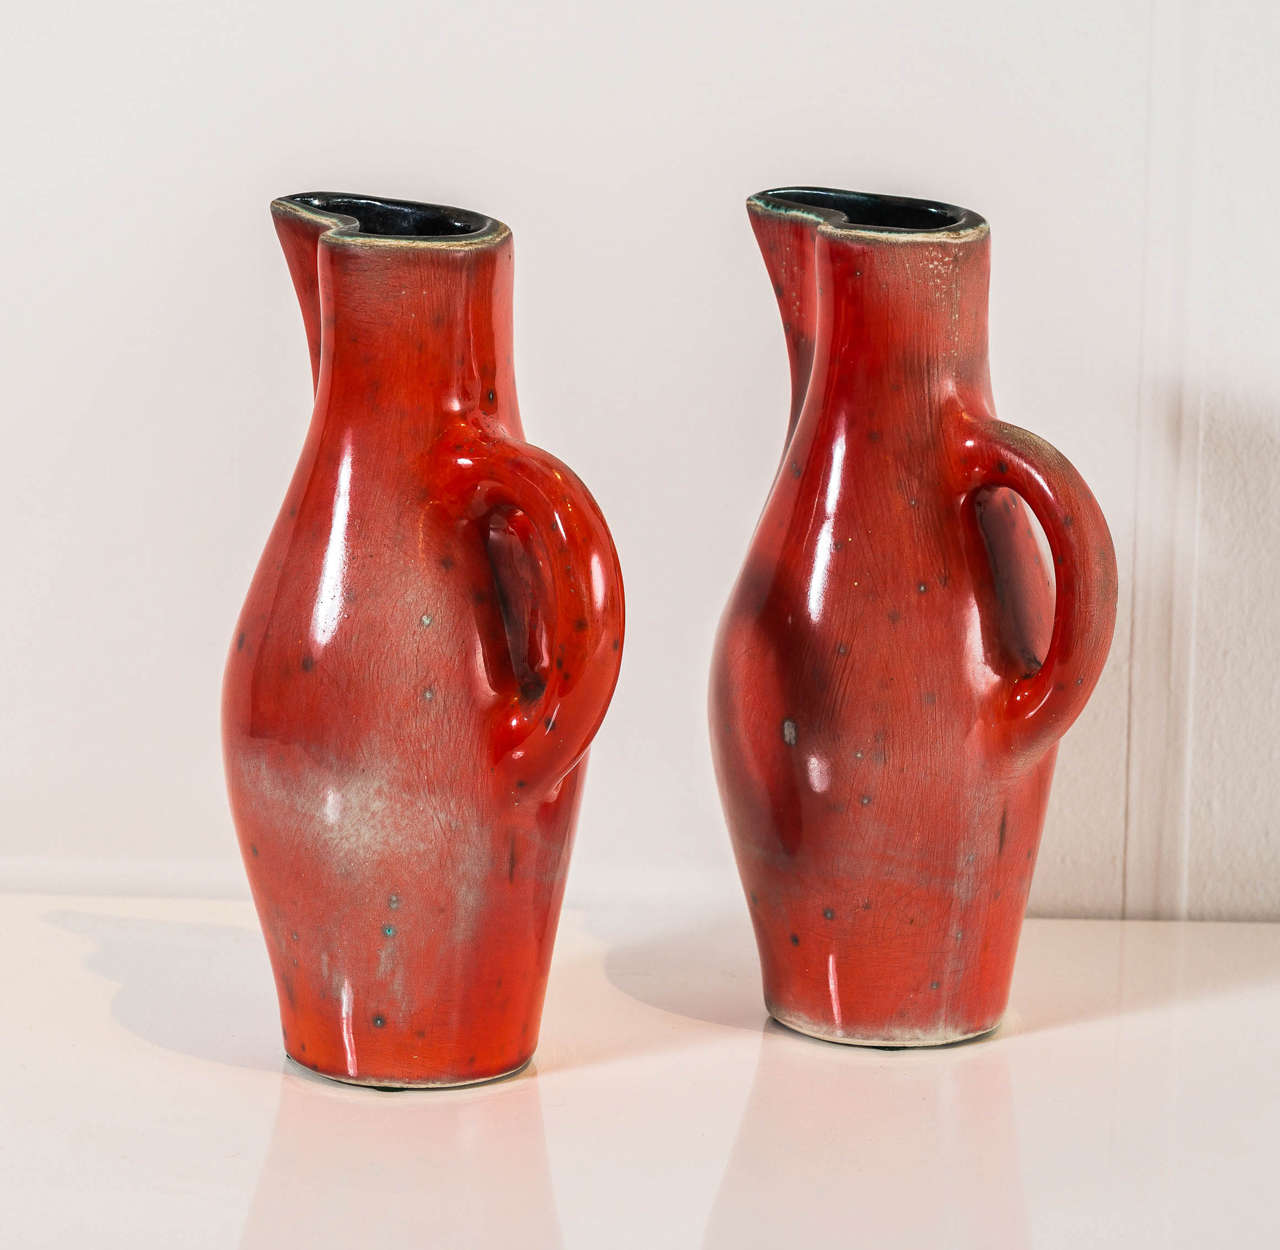 "Pichets Rouges" - A rare pair of red and black, glazed ceramic pitchers.
Underside incised with "Apollon" artist's mark and Jouve.  France, circa 1955.
Literature: M. Fare "Jouve Ceramiste" Paris, 1955, P. 70 for a